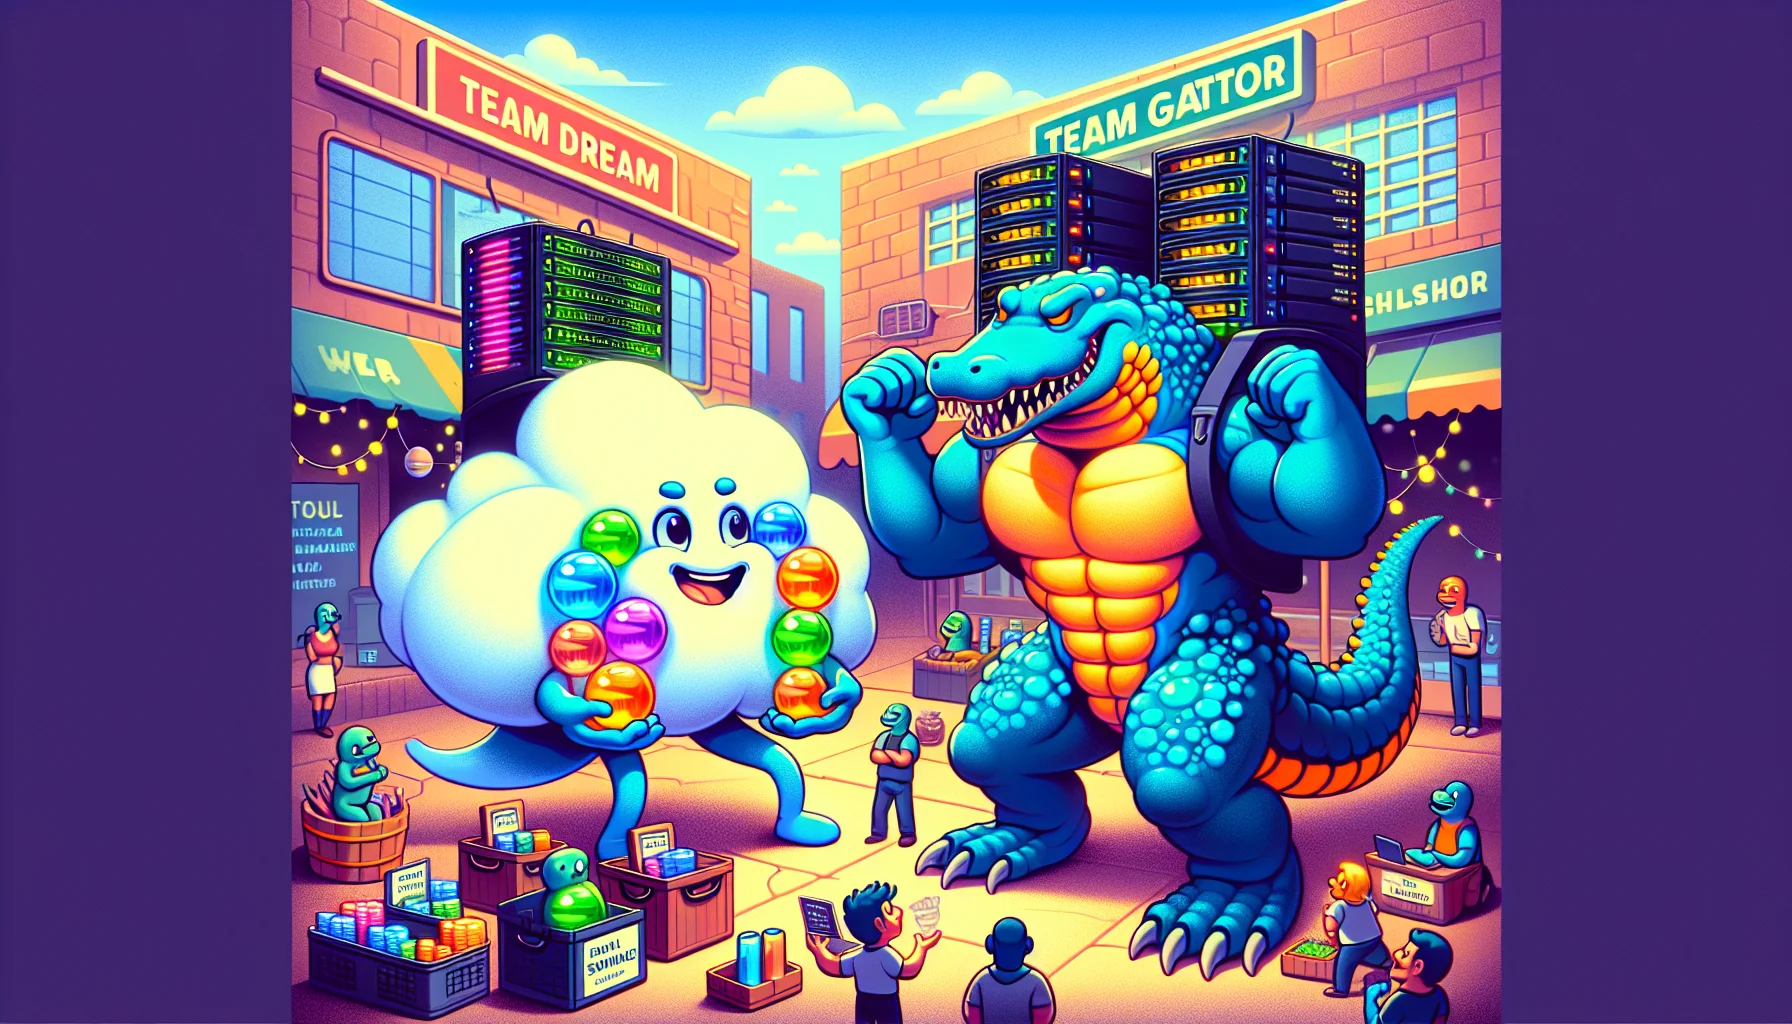 Create a lively and humorous scene depicting the competition for web hosting between two imaginative creatures, one representing 'Team Dream', and the other for 'Team Gator'. 'Team Dream' creature, a fluffy cloud-like entity, is equipped with a toolkit full of colorful glass orbs representing reliable server connections; it has a radiant smile, trying to attract more clients. 'Team Gator' is a powerful swamp creature, an alligator with a futuristic backpack that emits codes and signals; it tries to show its strength by flexing its massive arms. They are at a busy marketplace filled with small businesses looking for hosting service; their antics cause laughter, showcasing the friendly competition between the two.